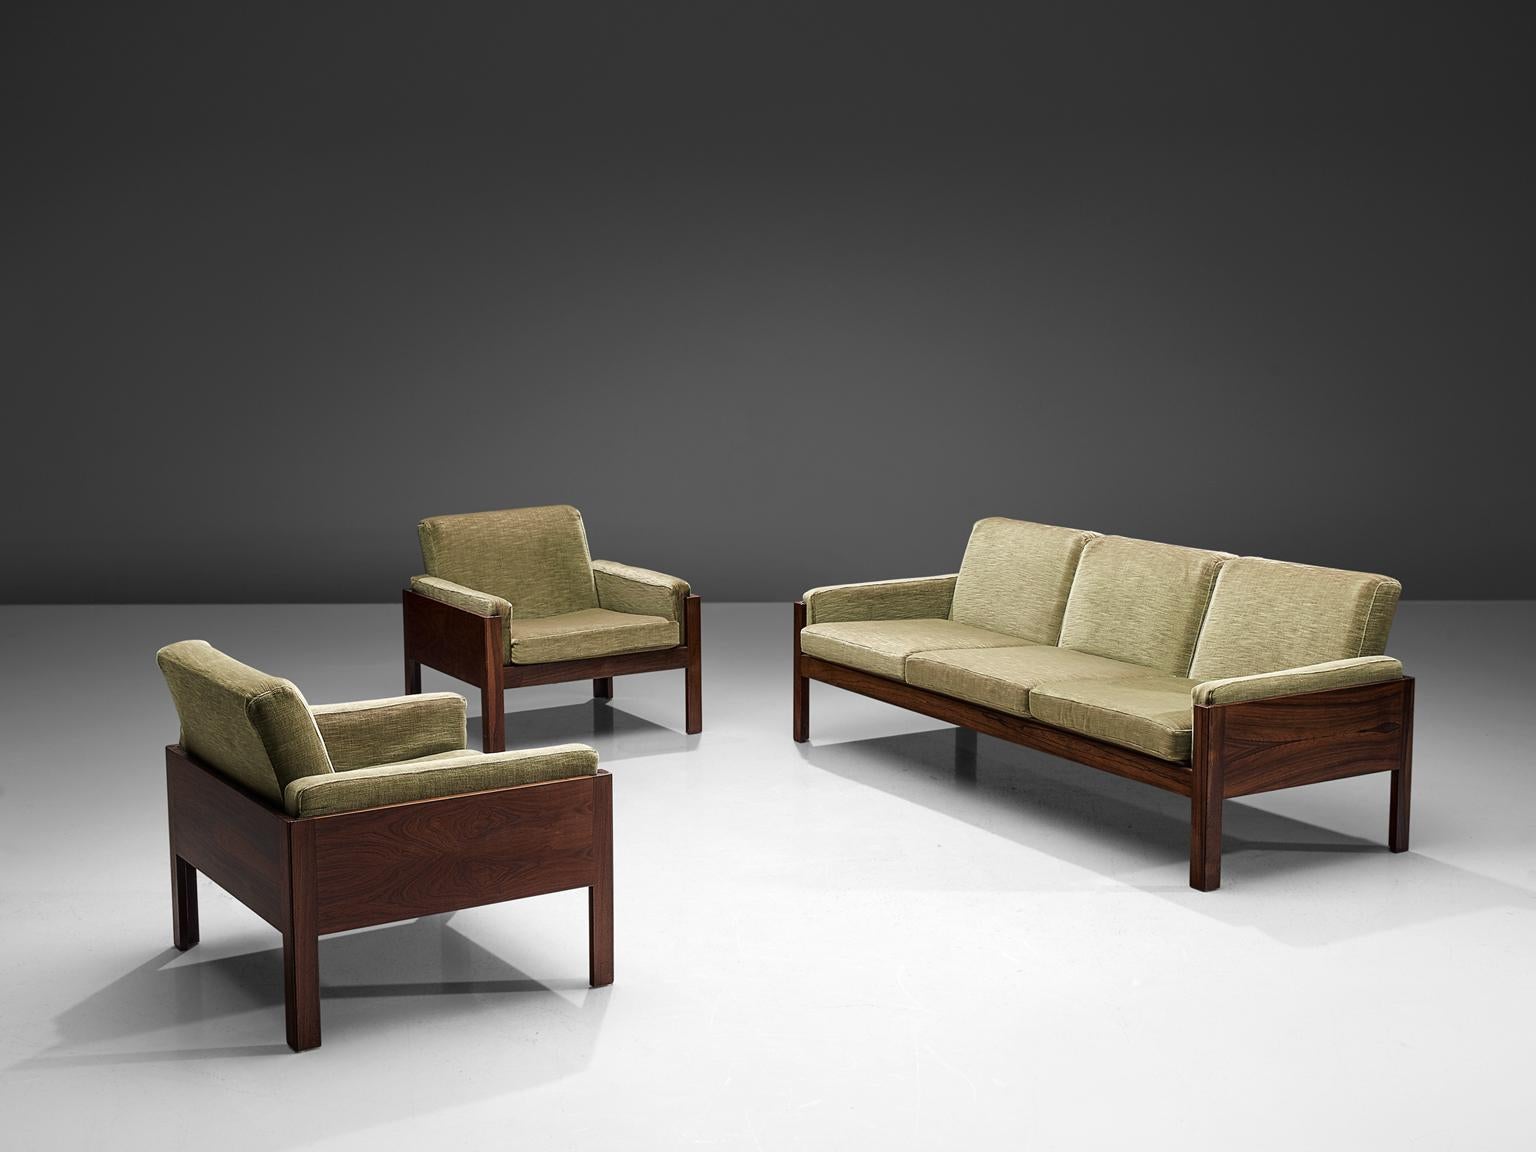 Living room set in rosewood and green fabric, Scandinavia 1960s.

This living room set consists of a three-seat sofa and matching set of lounge chairs in rosewood. The pieces have a Minimalist, modest and modern design. The sofa and chairs feature